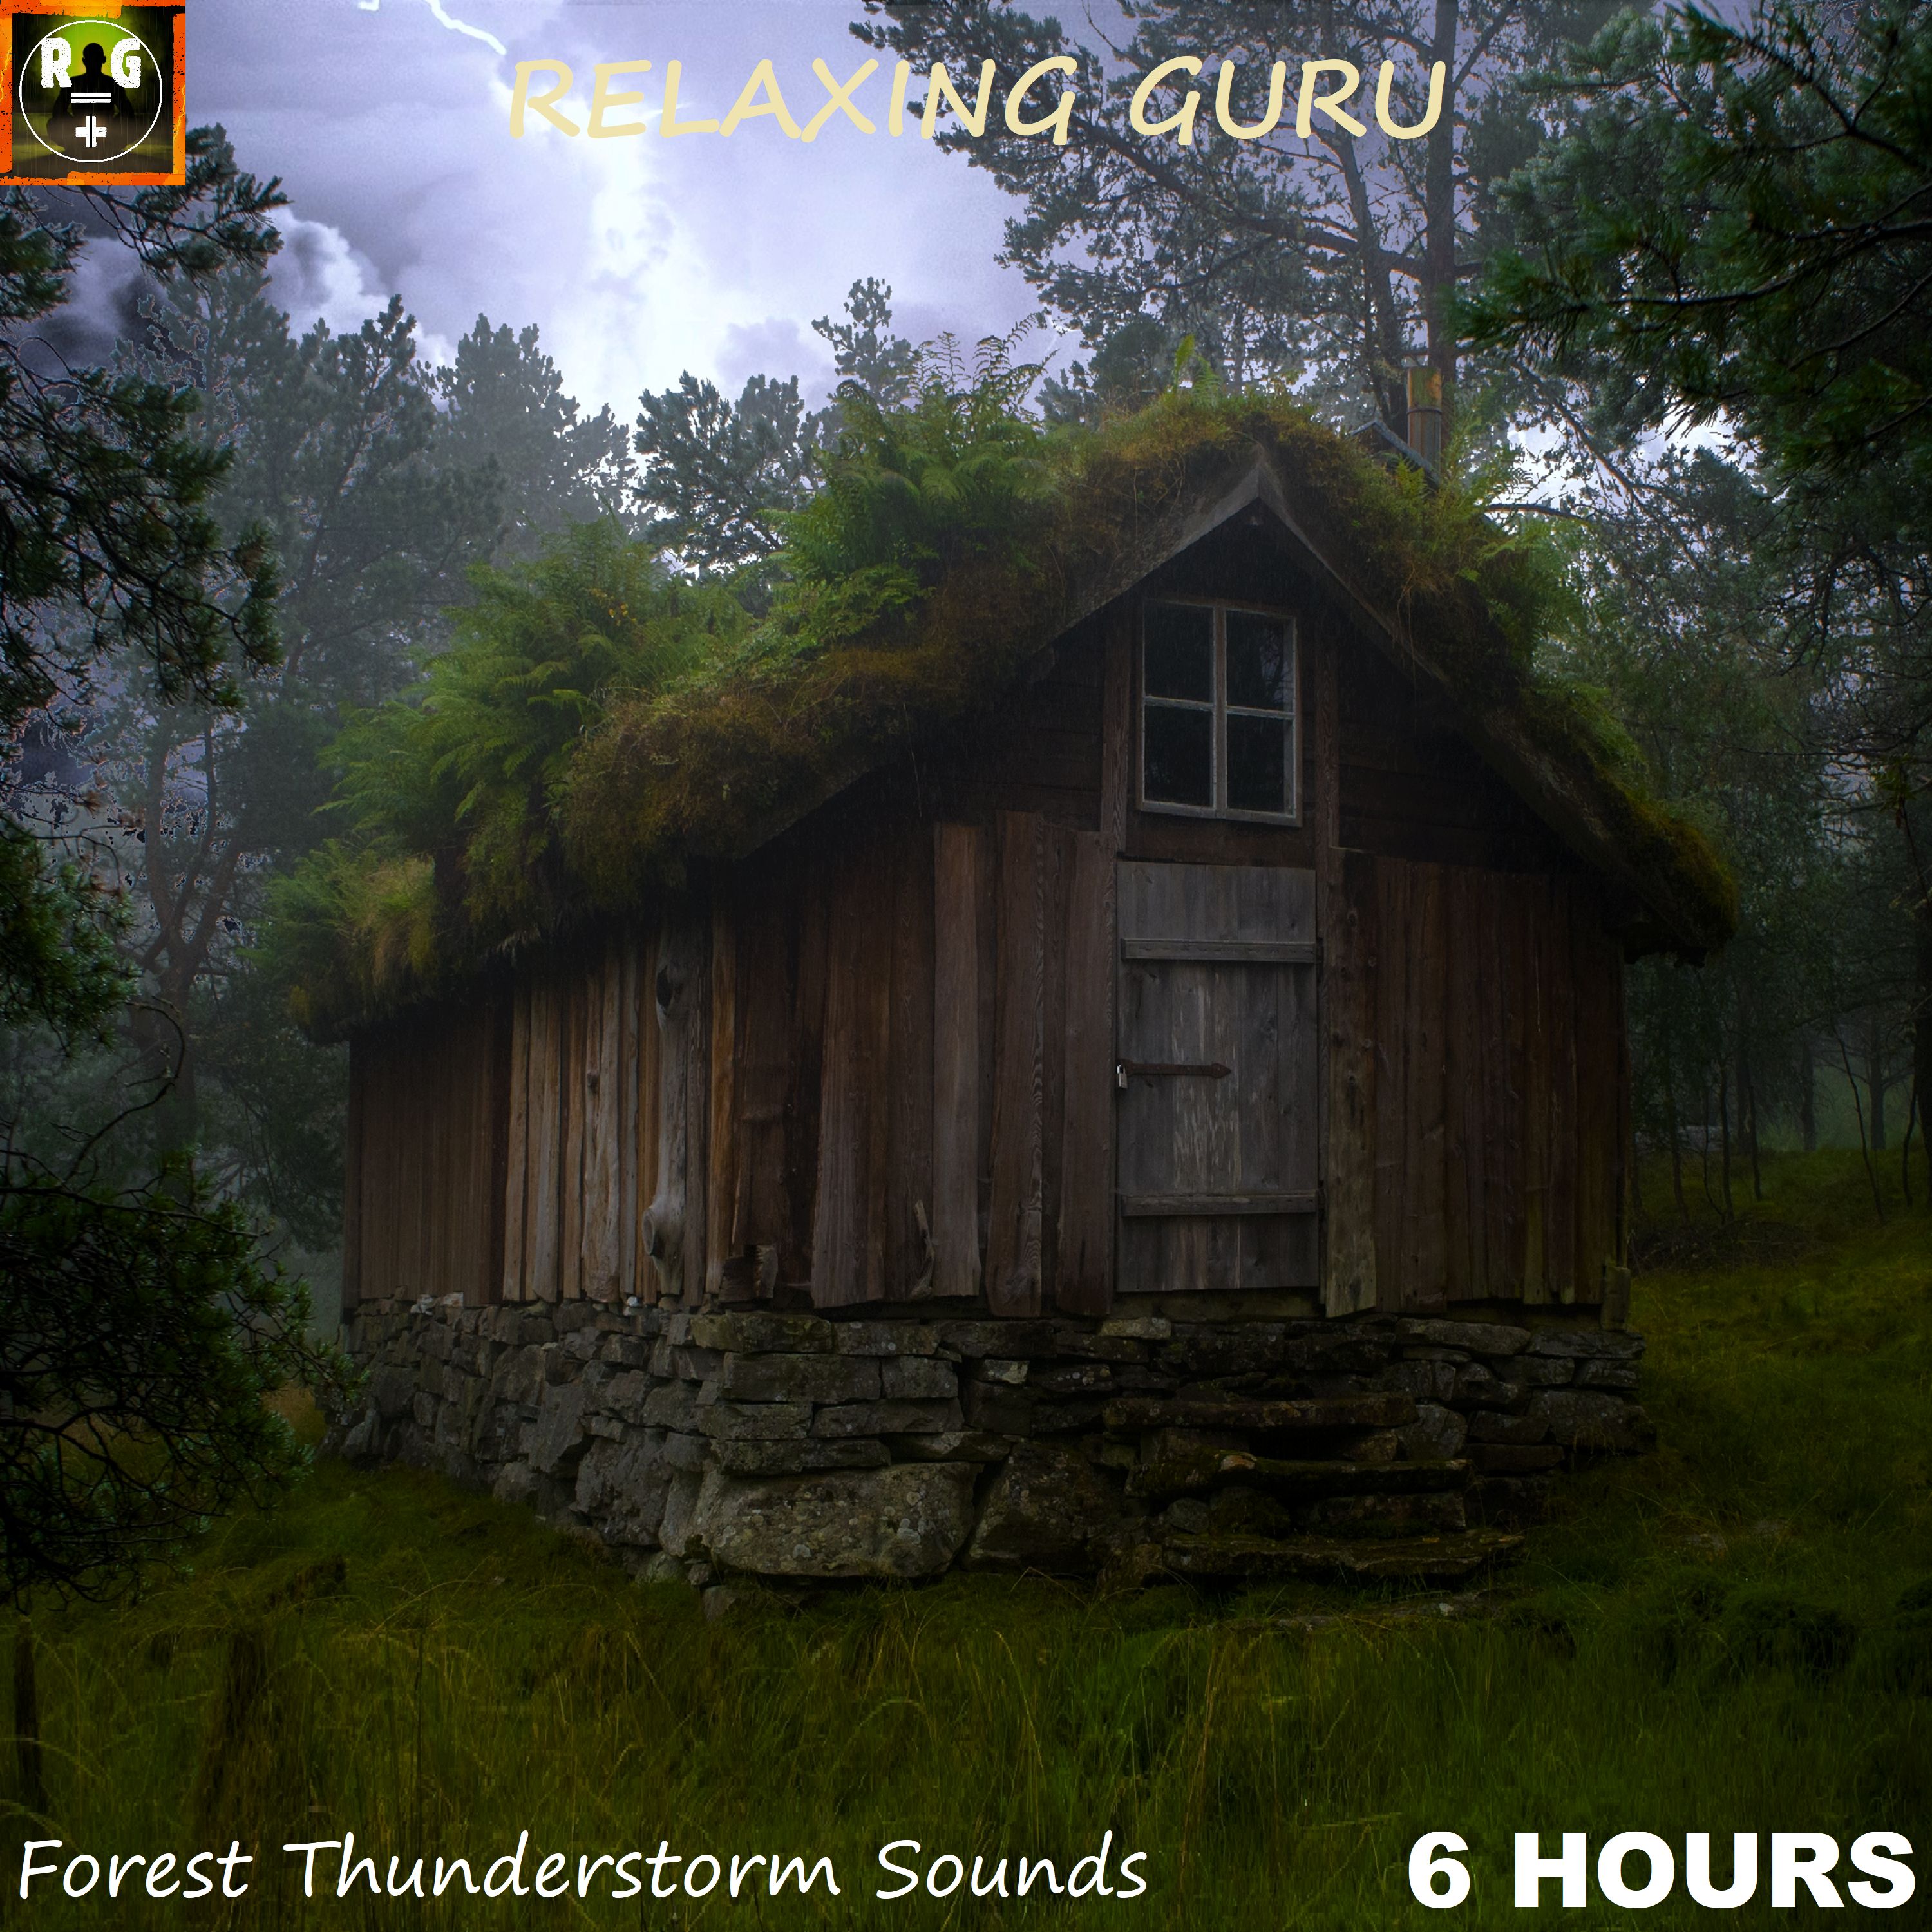 Dhawunirodha Relaxing Rain & Thunder on a Wooden Hut deep in the Forest - Thunderstorm Sounds for Sleep (6 HOURS)